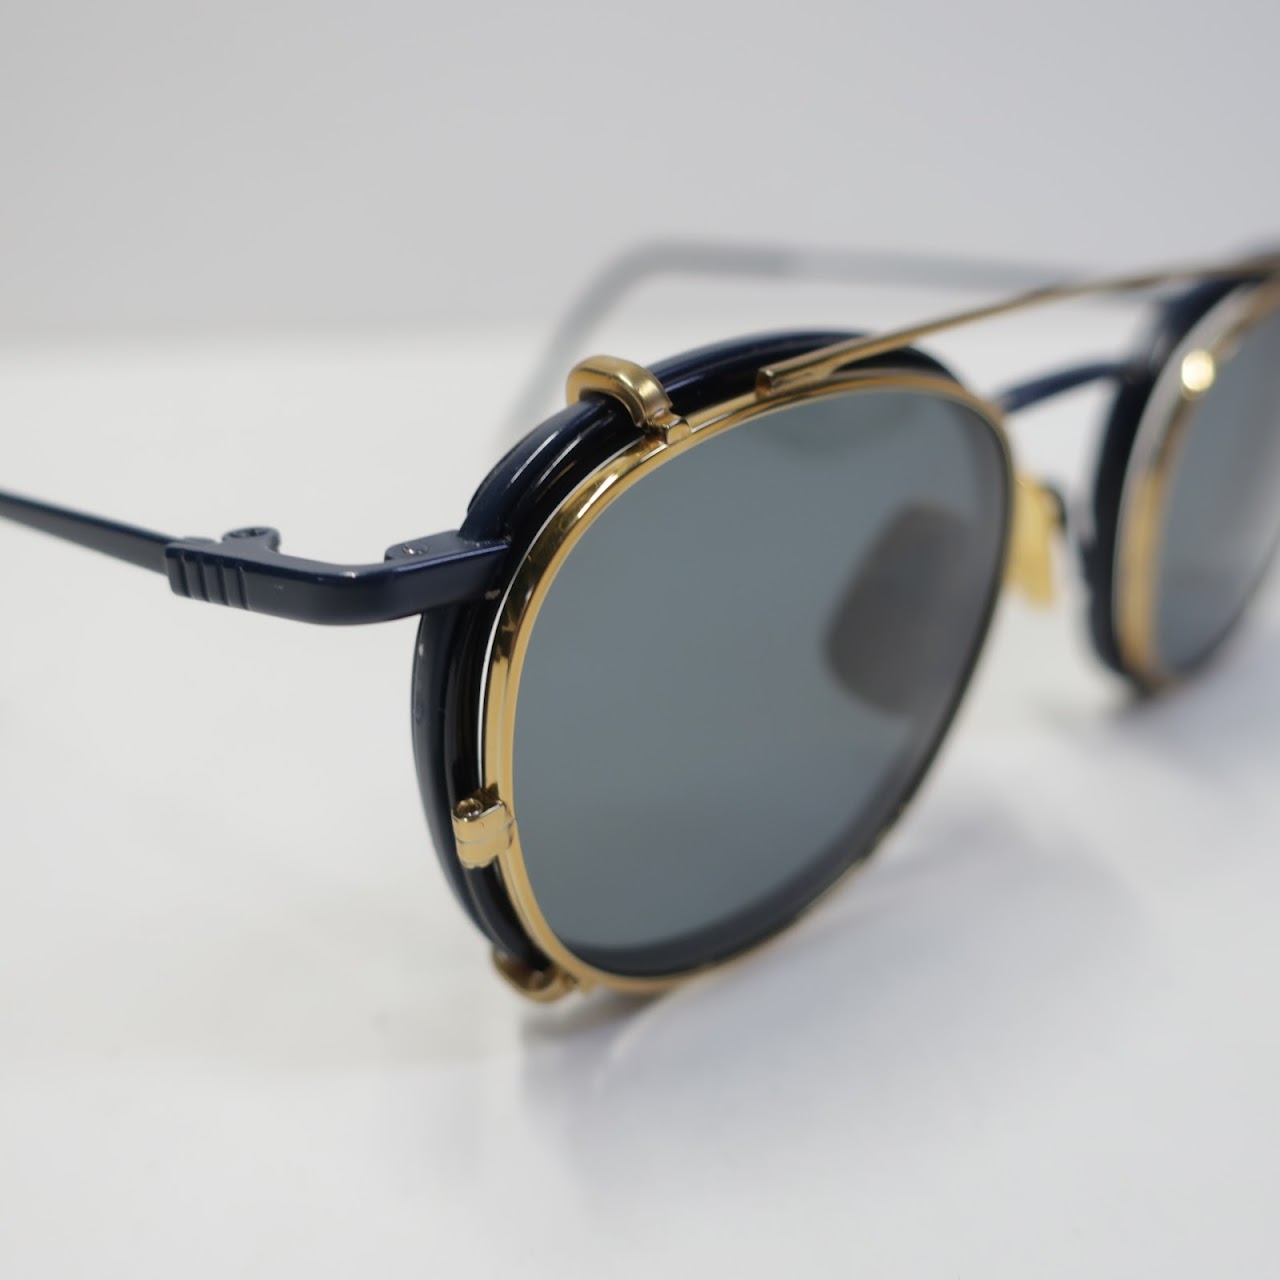 Thom Browne Rx Glasses With Clip-On Sunglasses